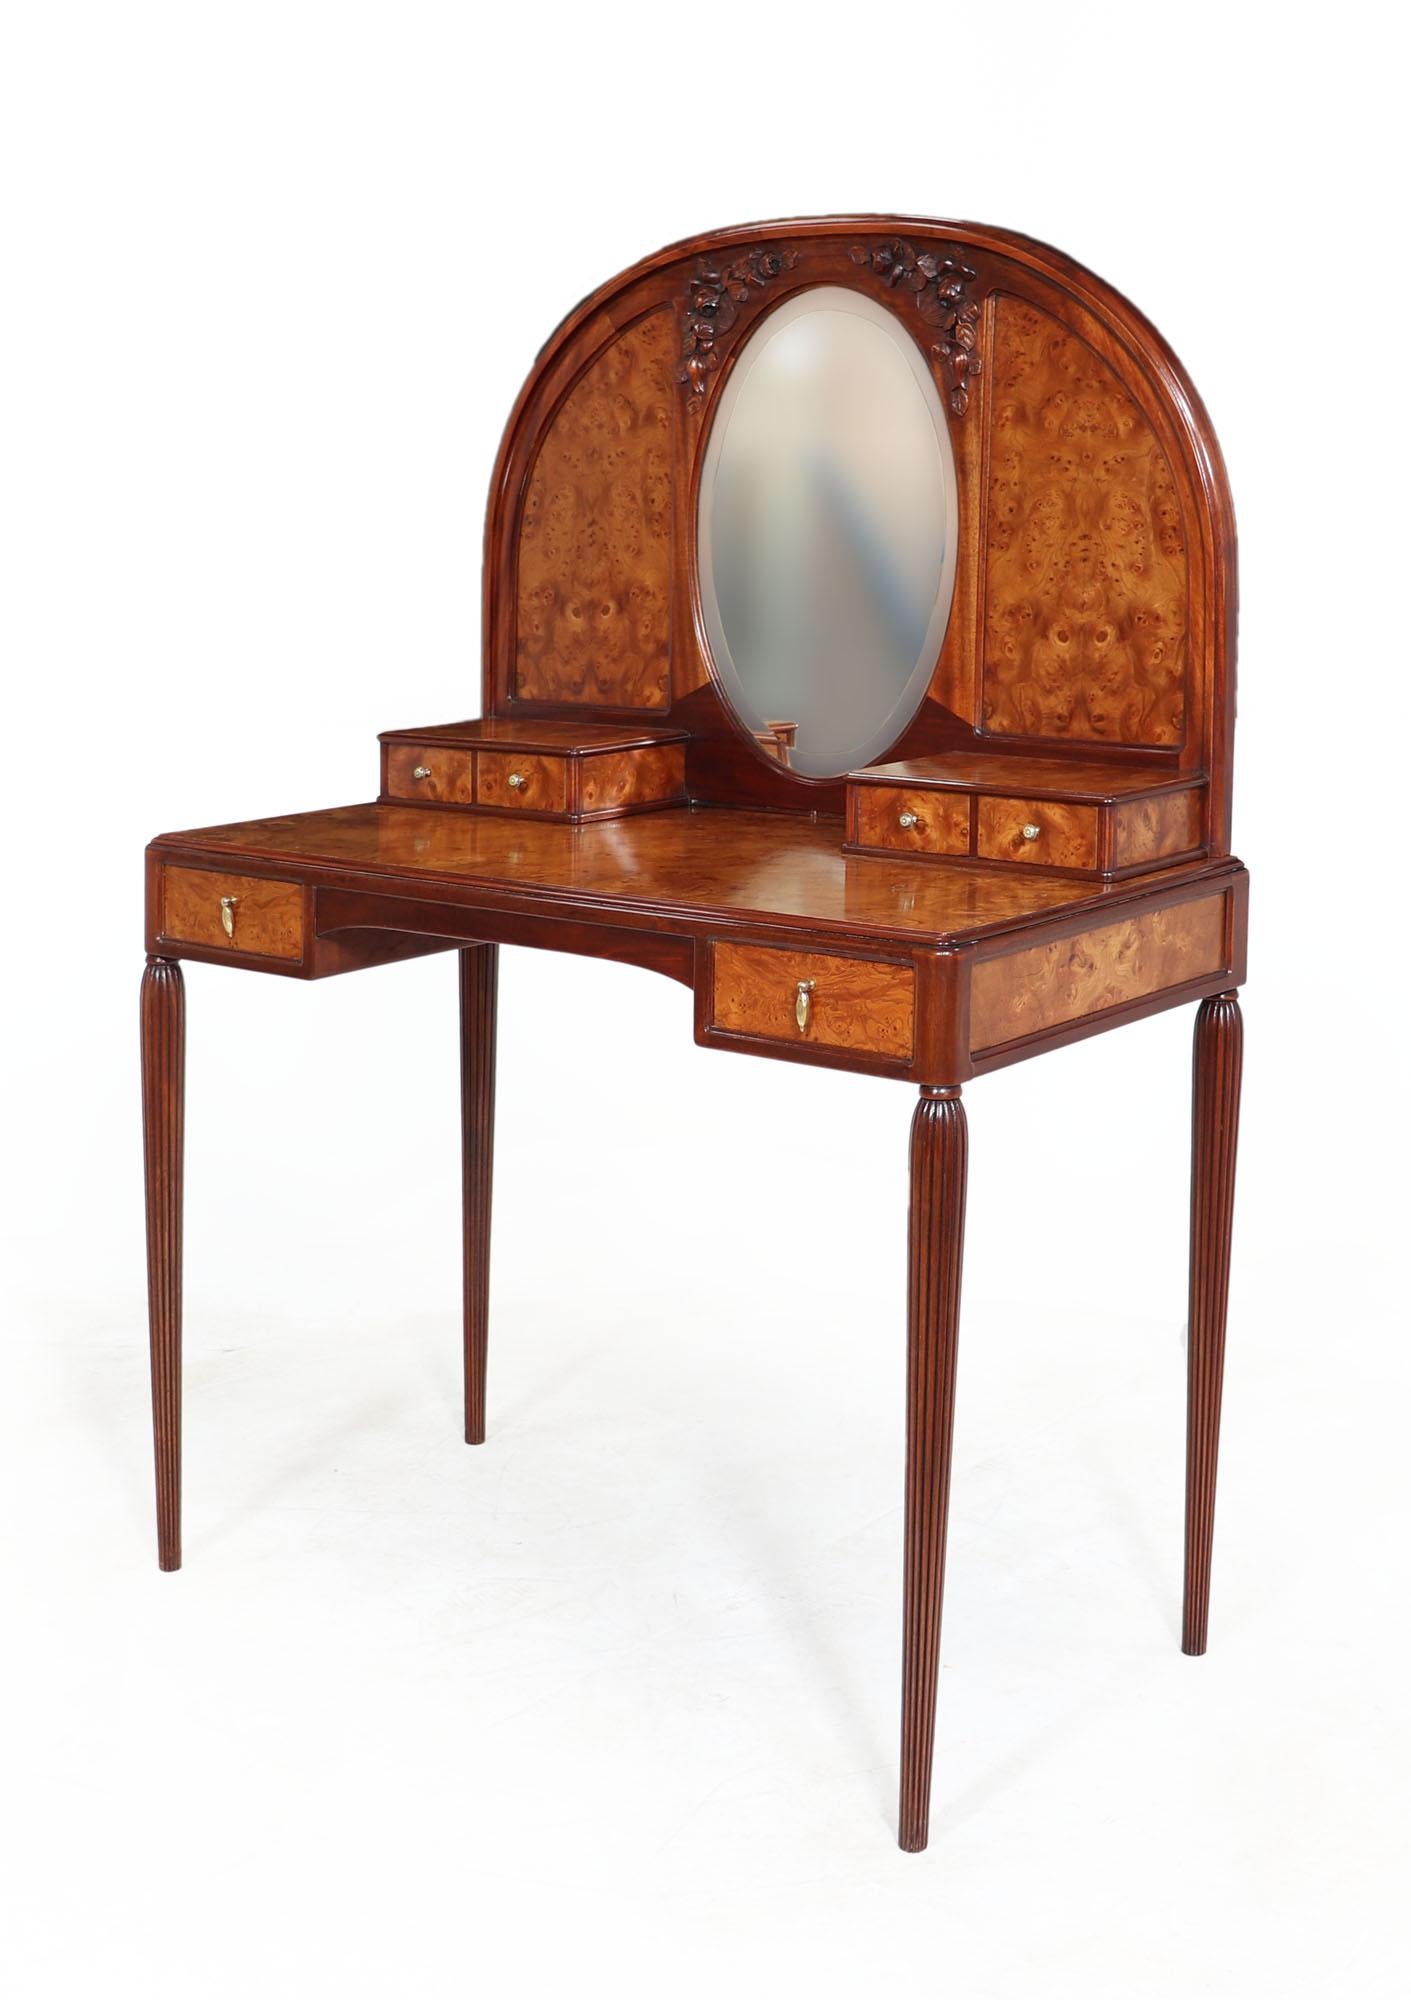 Early 20th Century French Art Nouveau Dressing Table in Burr Elm